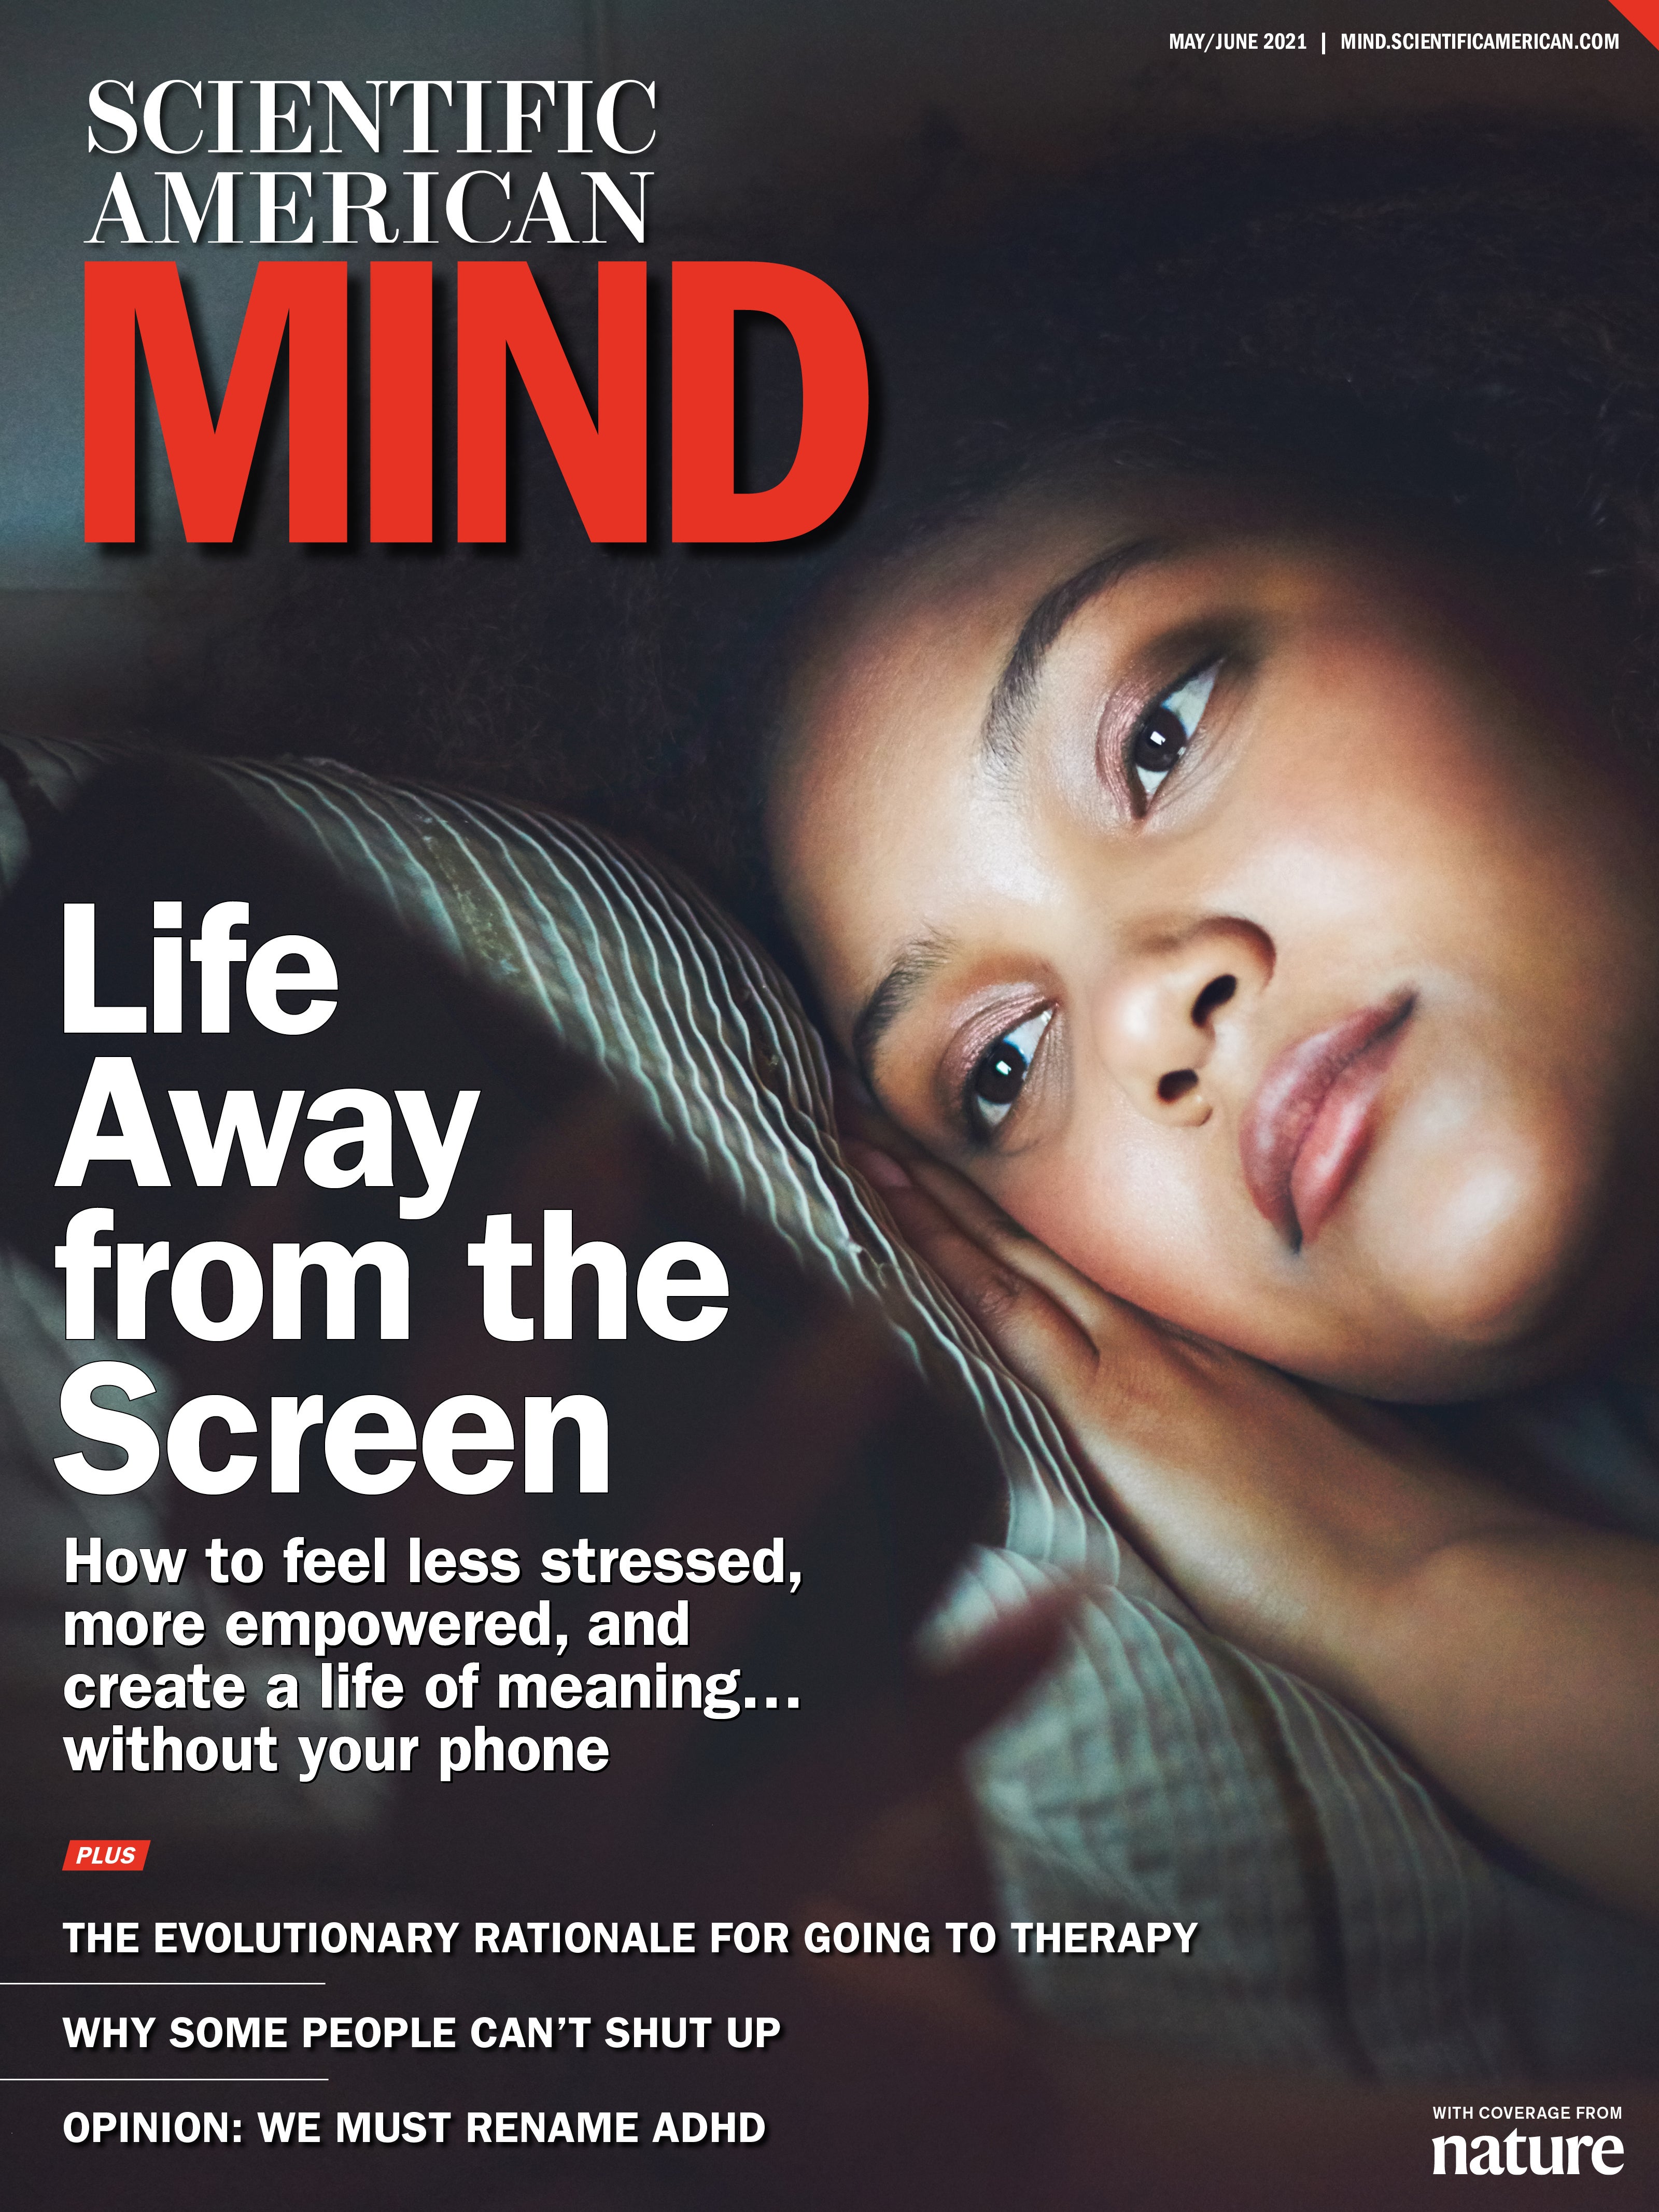 Scientific American Mind, Life Away from the Screen